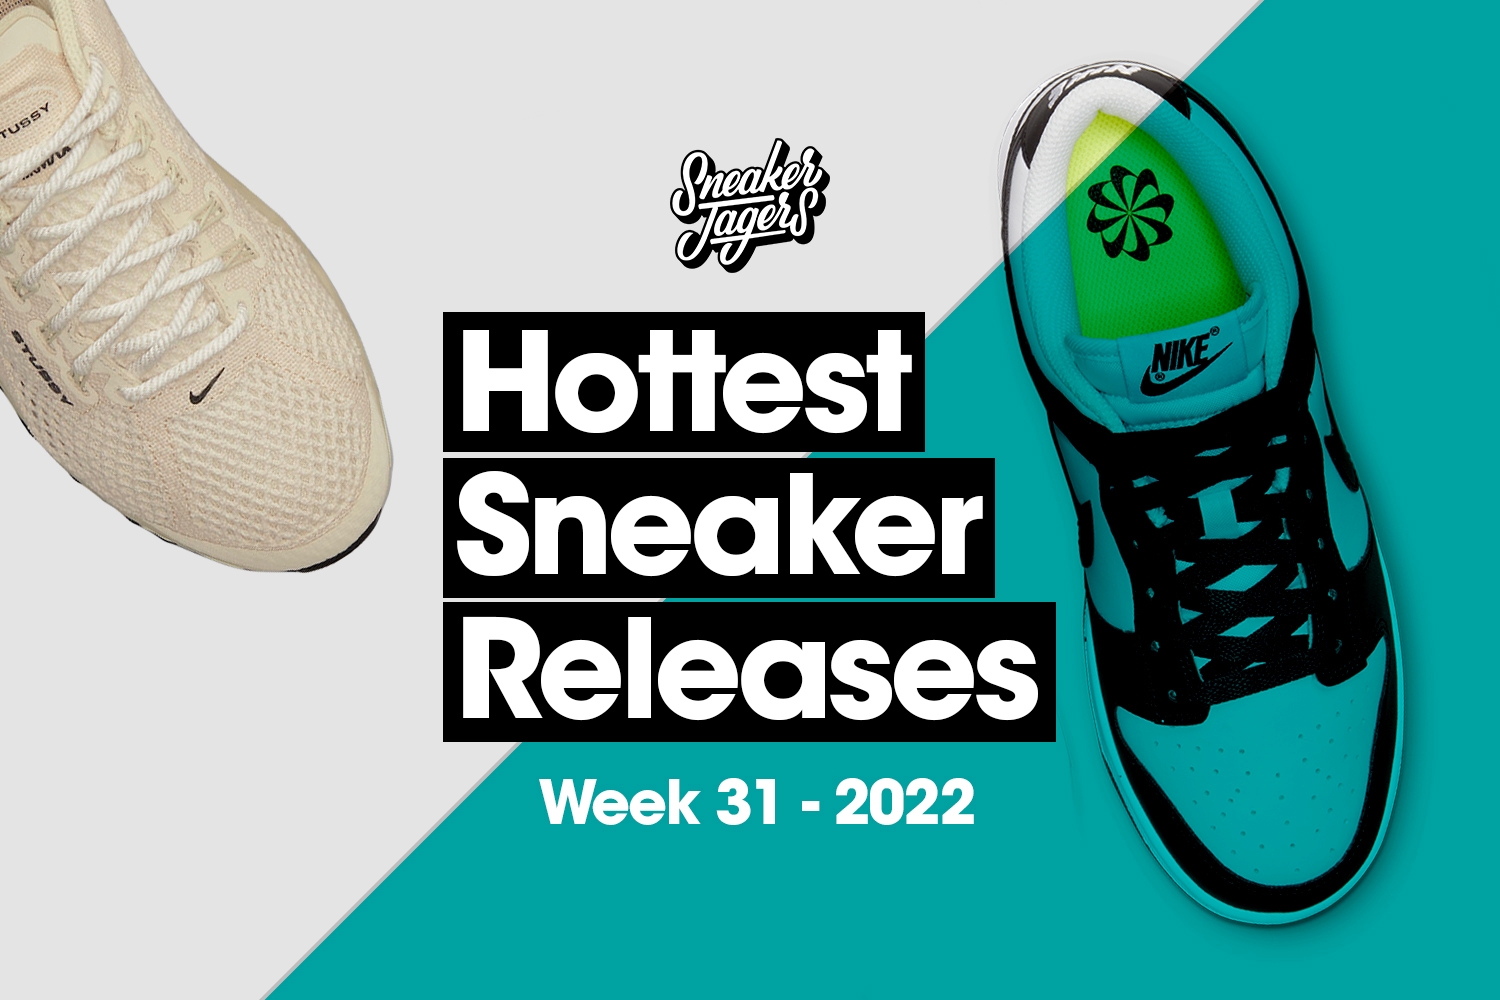 Hottest Sneaker Releases - WK 31